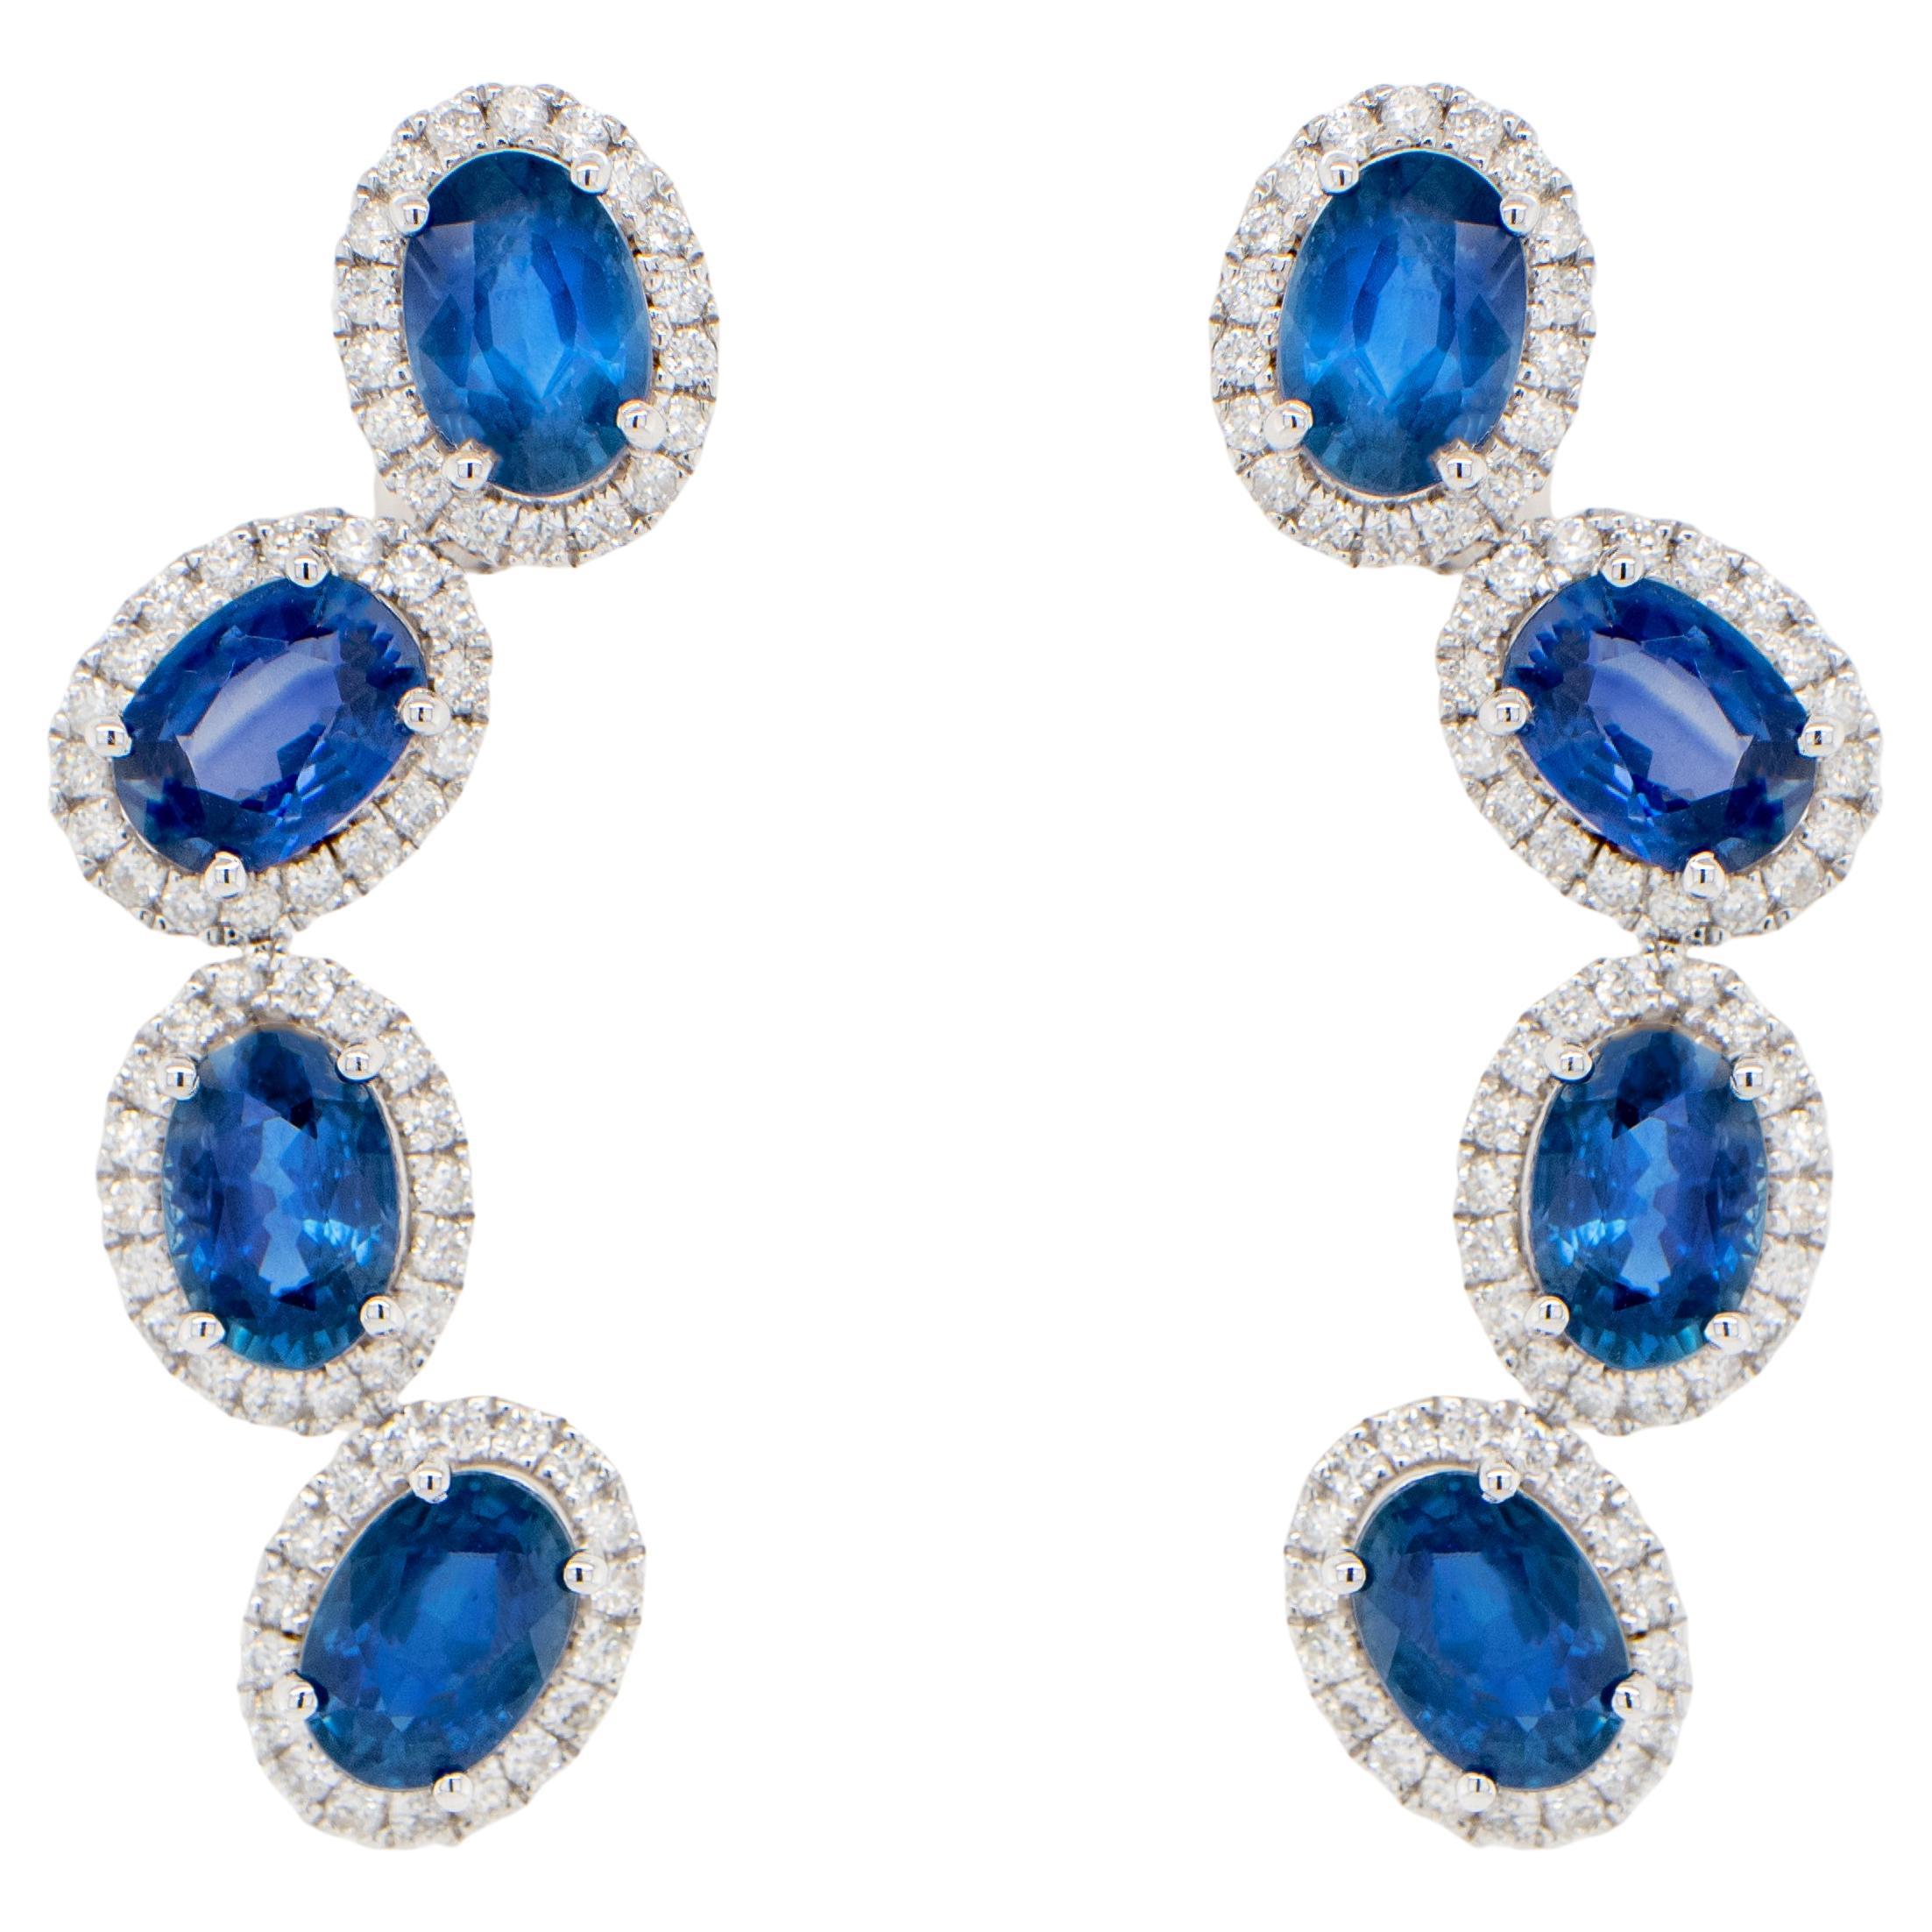 Blue Sapphire Earrings With Diamonds 5.69 Carats 18K Gold